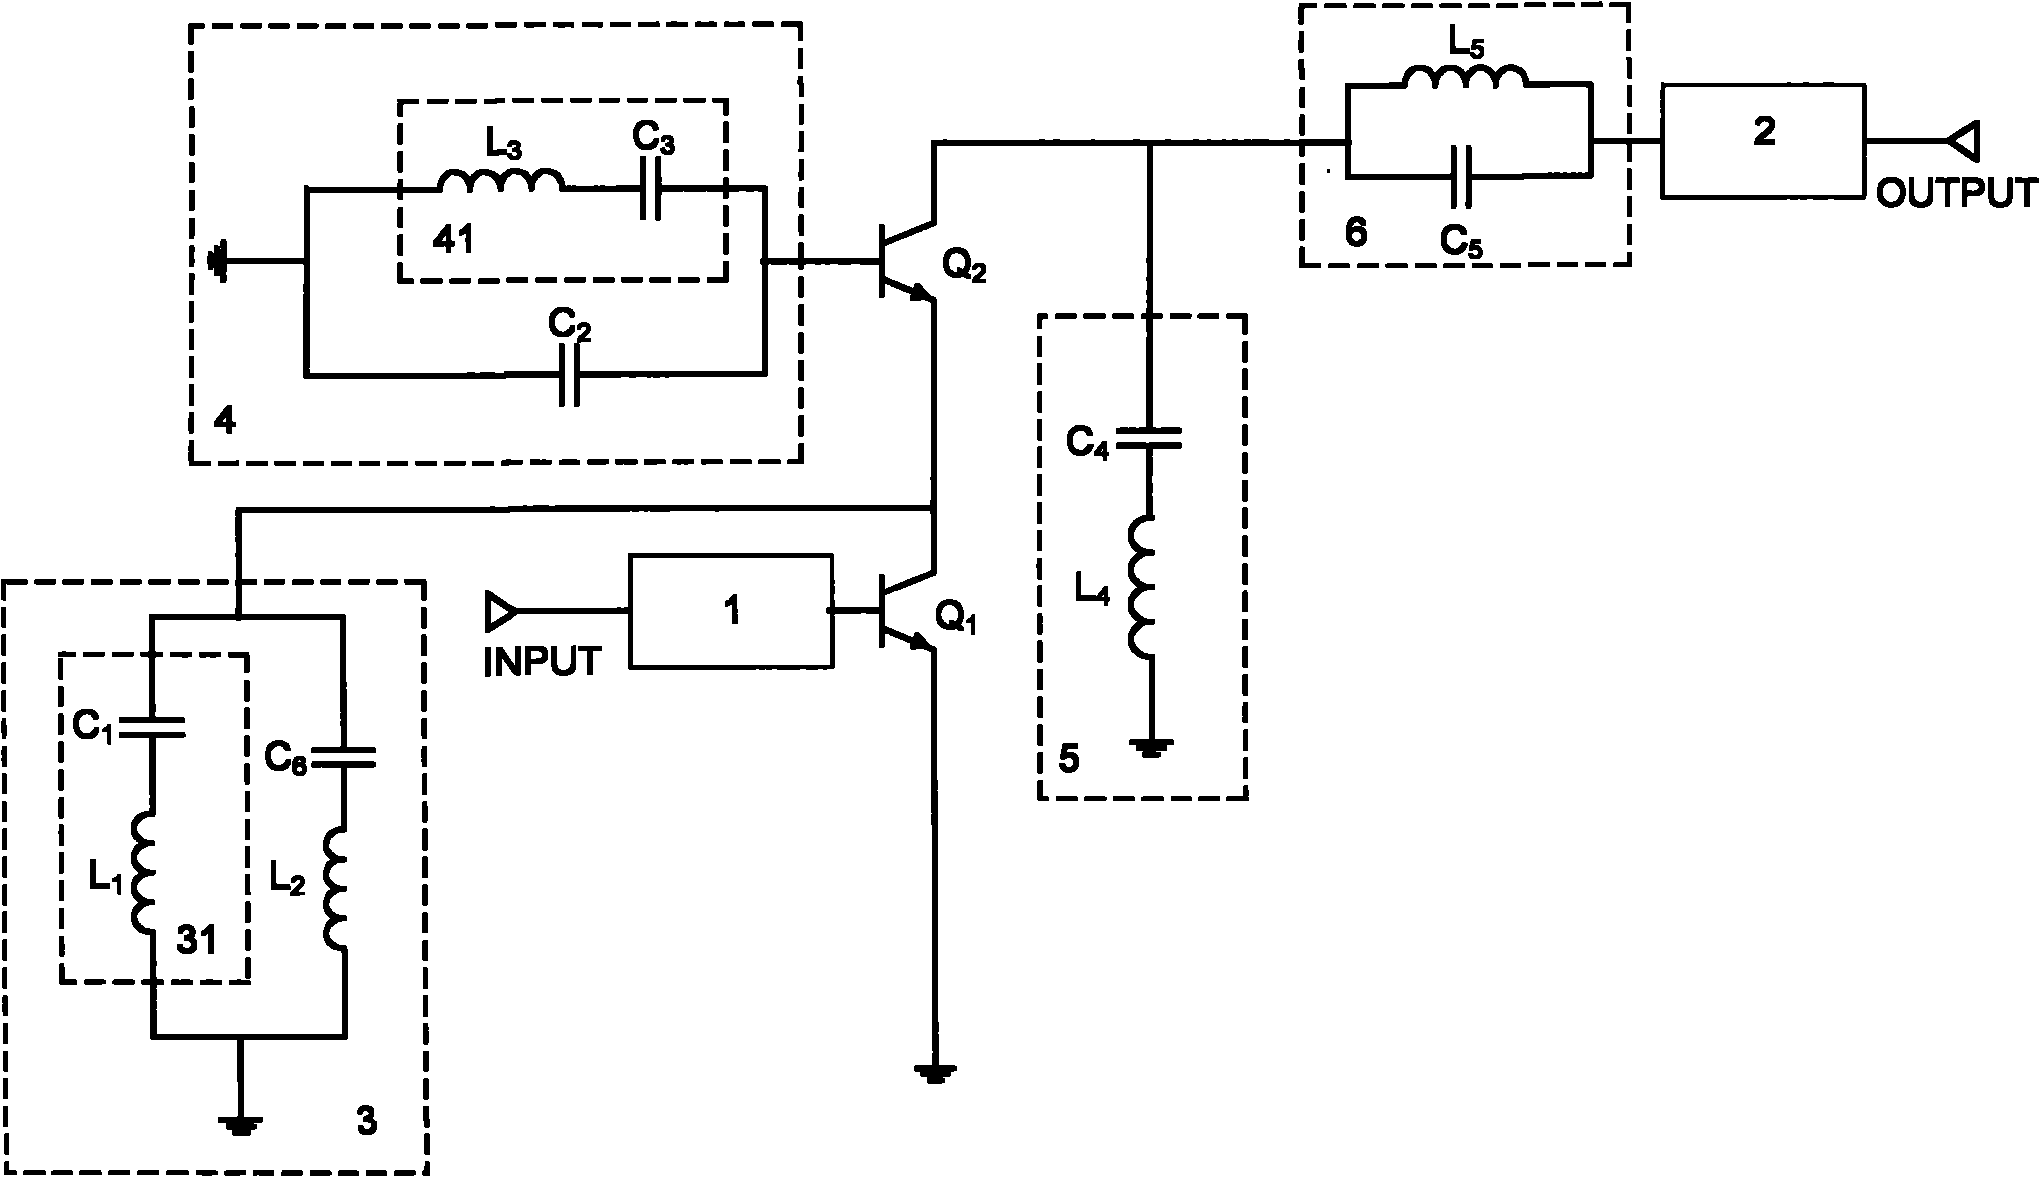 Cascode power amplifier with improved efficiency and linearity